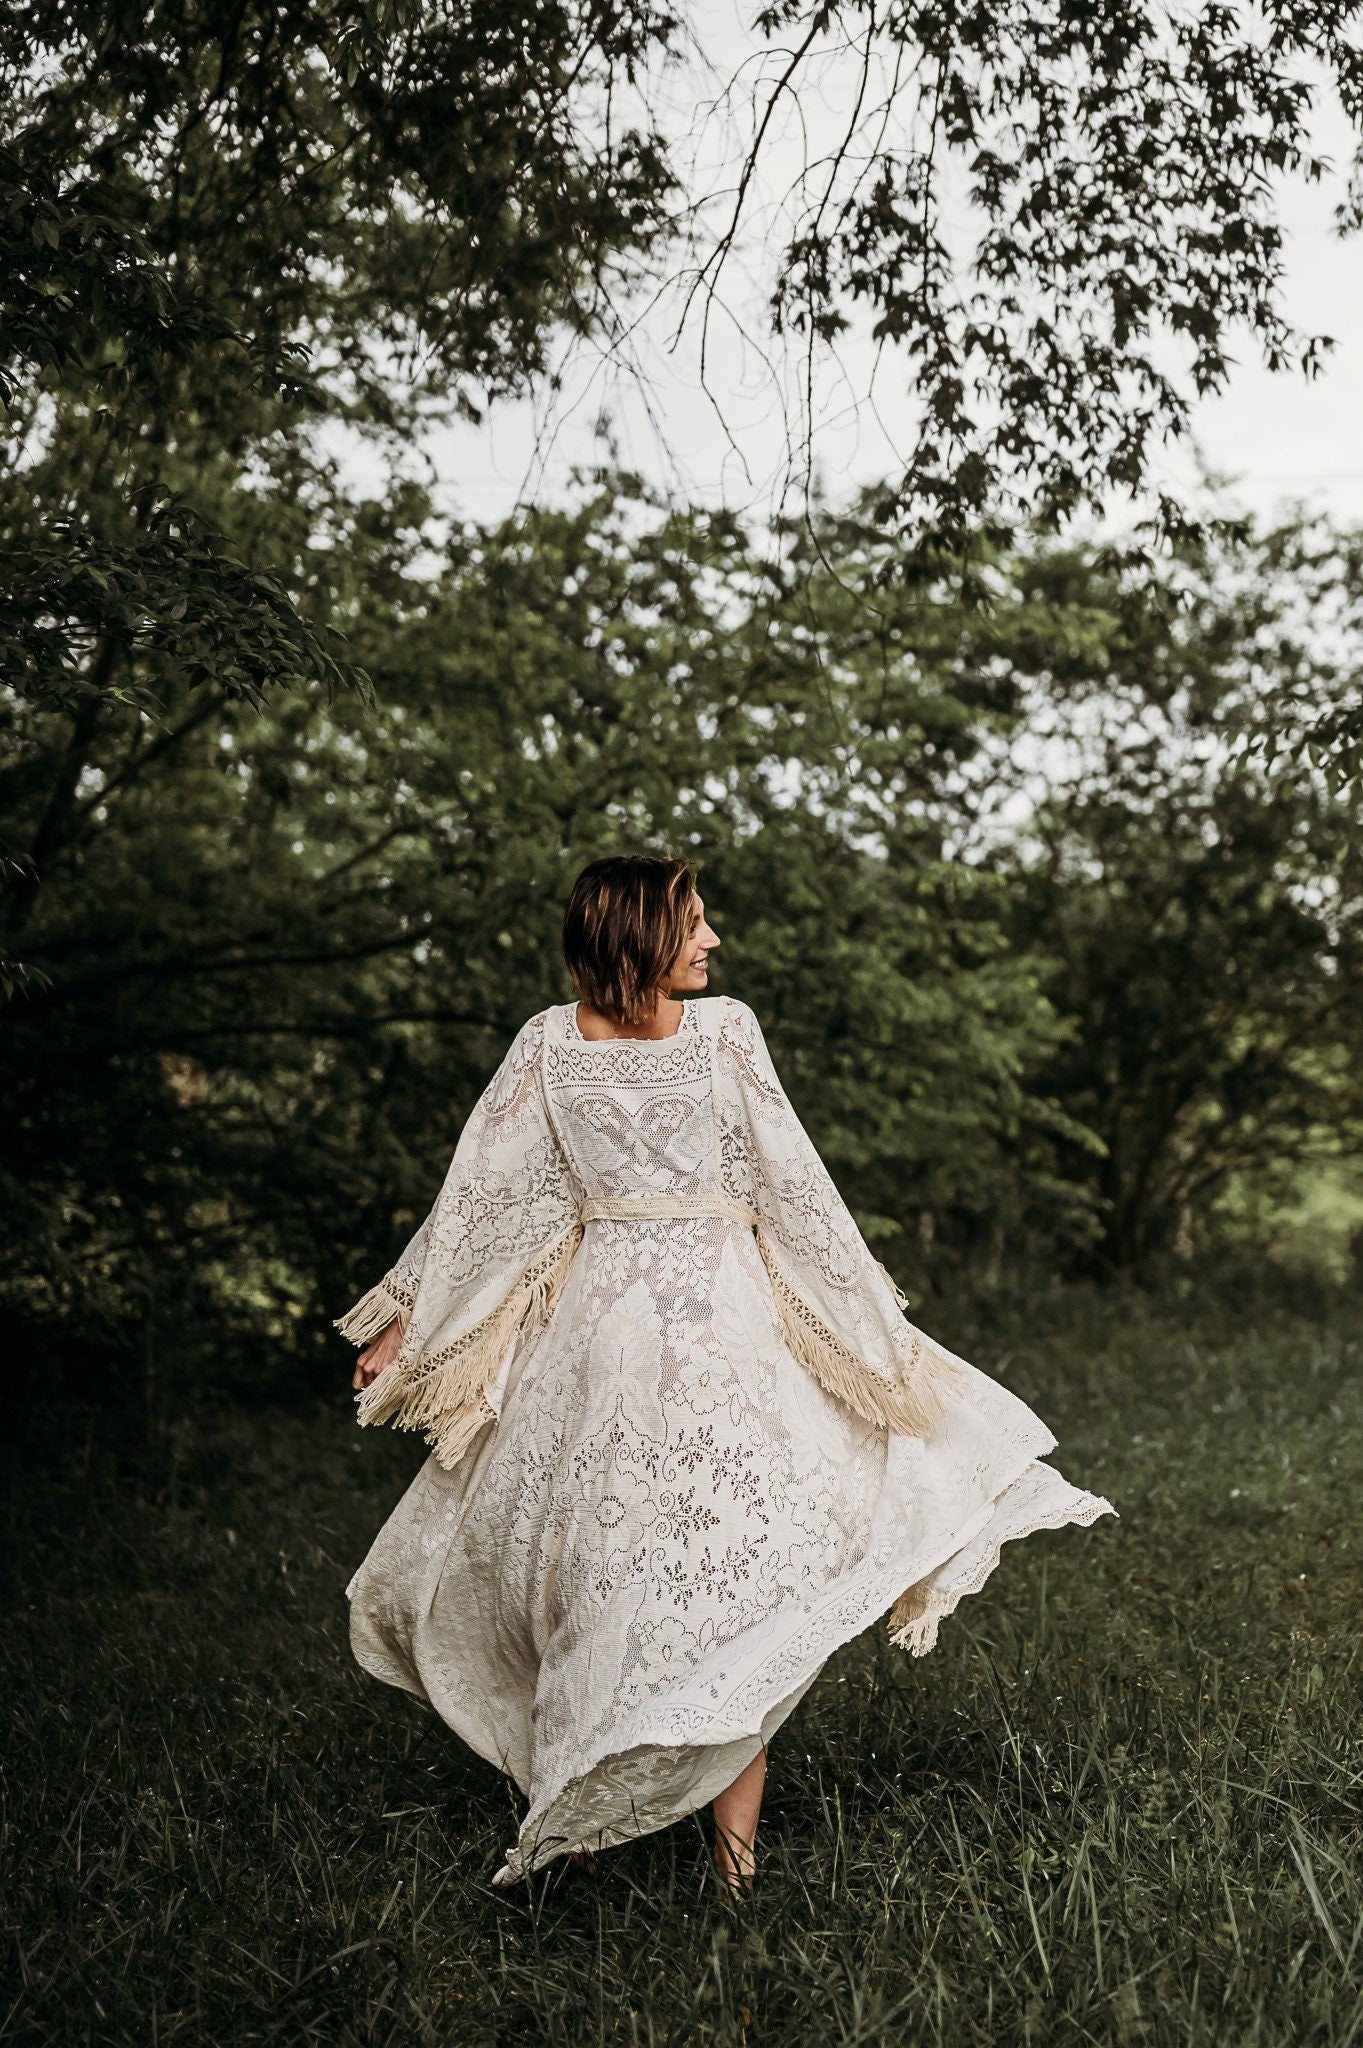 PREORDER- Robe Dress- One Size Fits Most Lace Dress - Boho Lace Dress - Maternity Dress - Wedding Dress